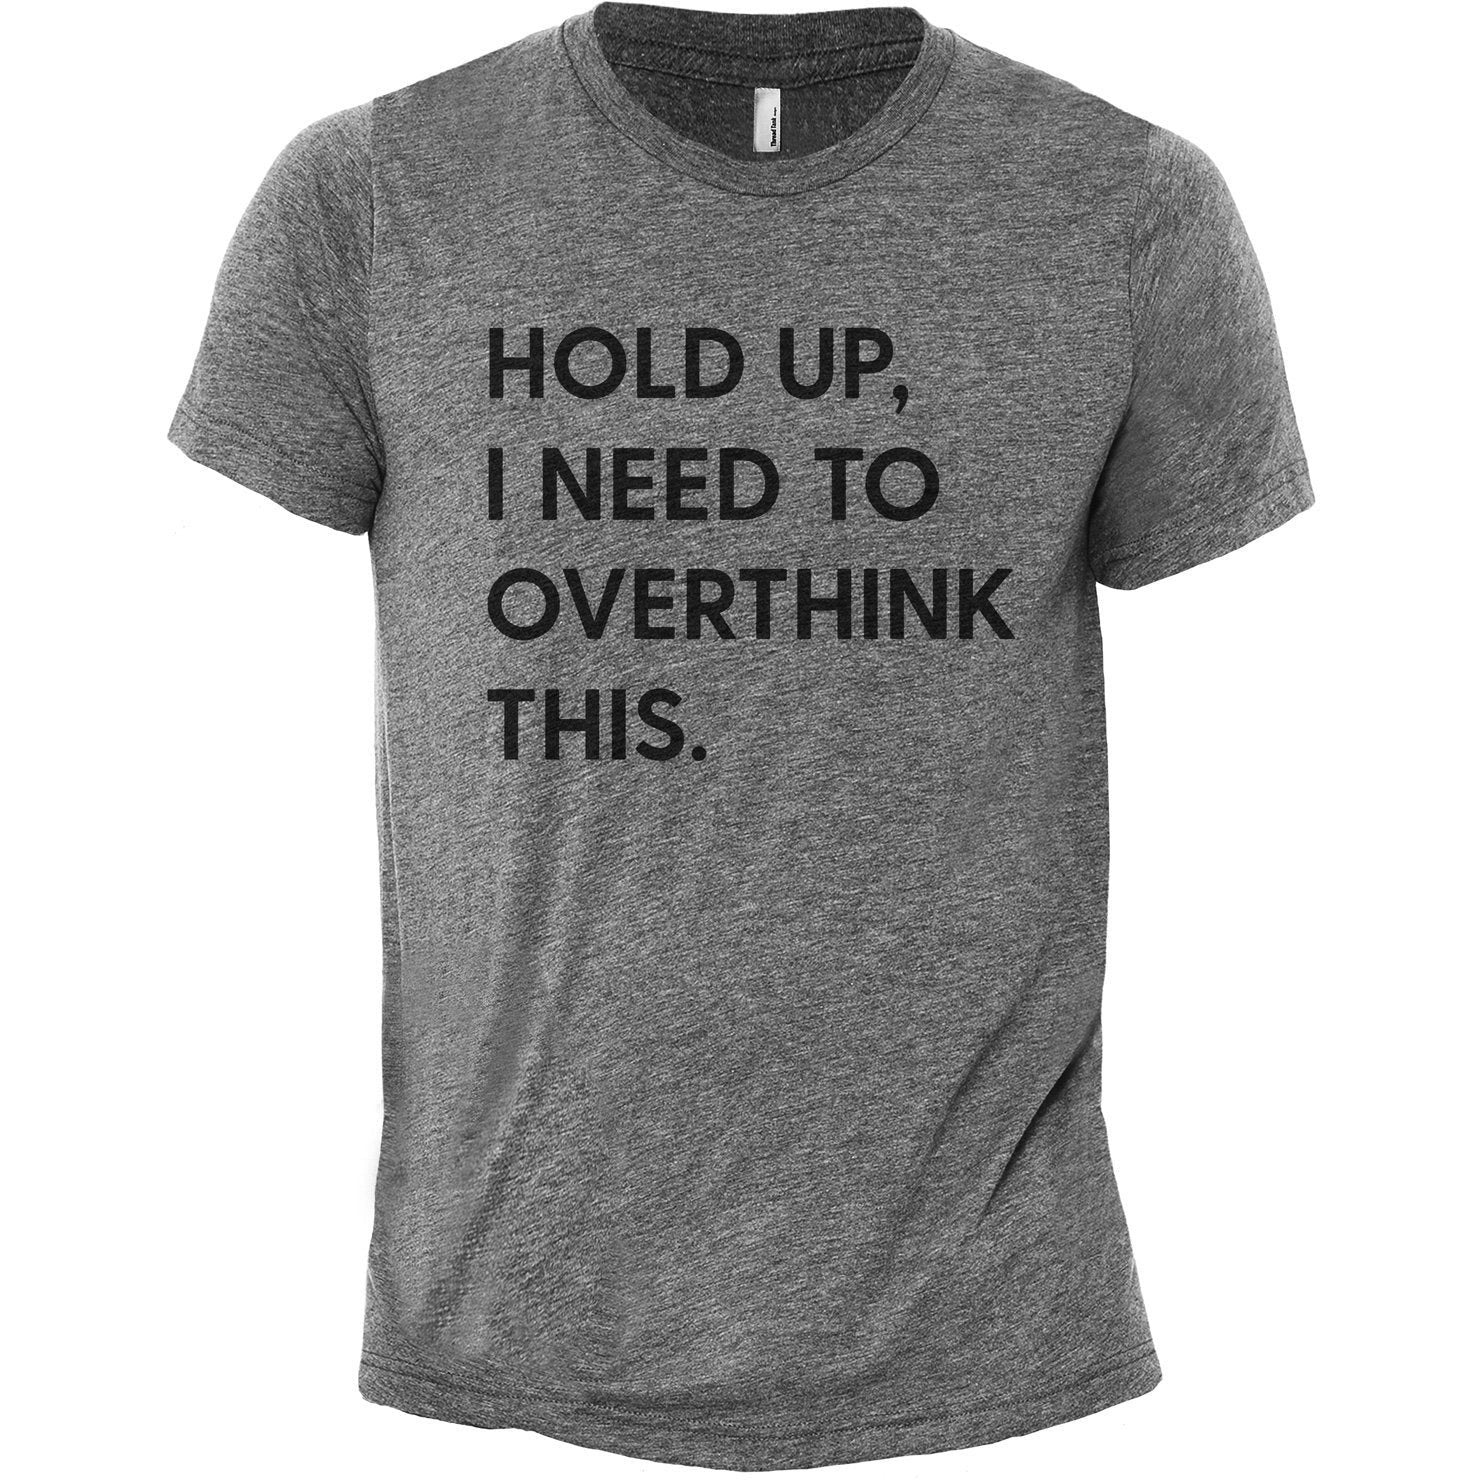 Hold Up, I Need To Rethink ThisHeather Grey Printed Graphic Men's Crew T-Shirt Tee